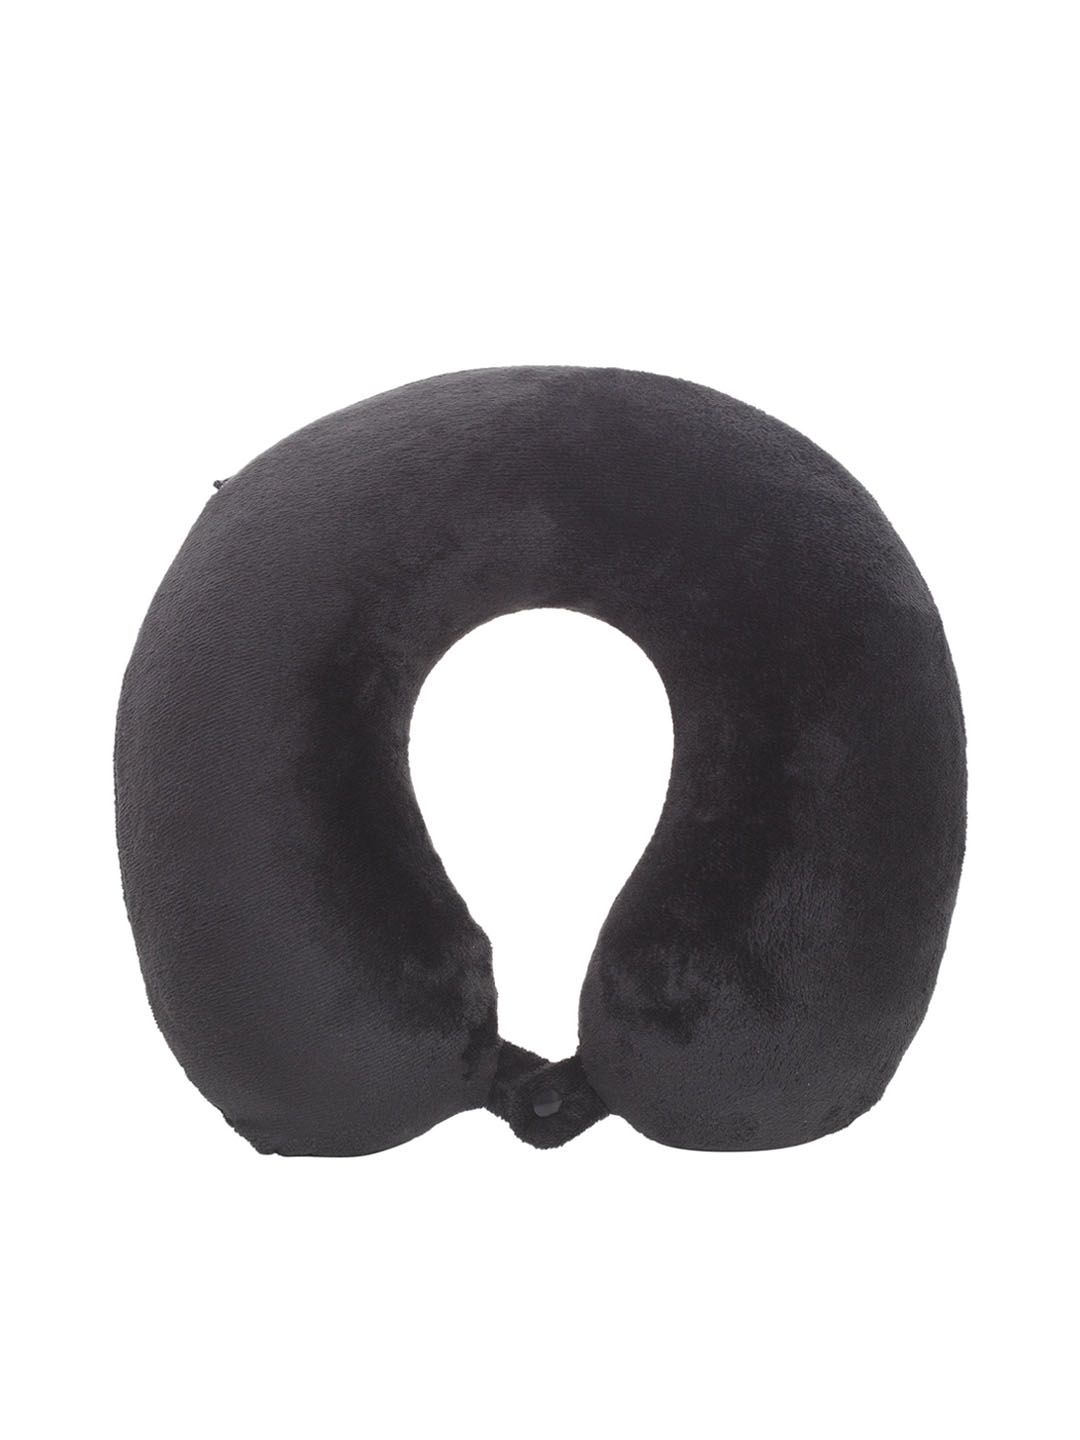 Teakwood Leathers Unisex Black Solid Memory Foam Travel Neck Pillow Price in India